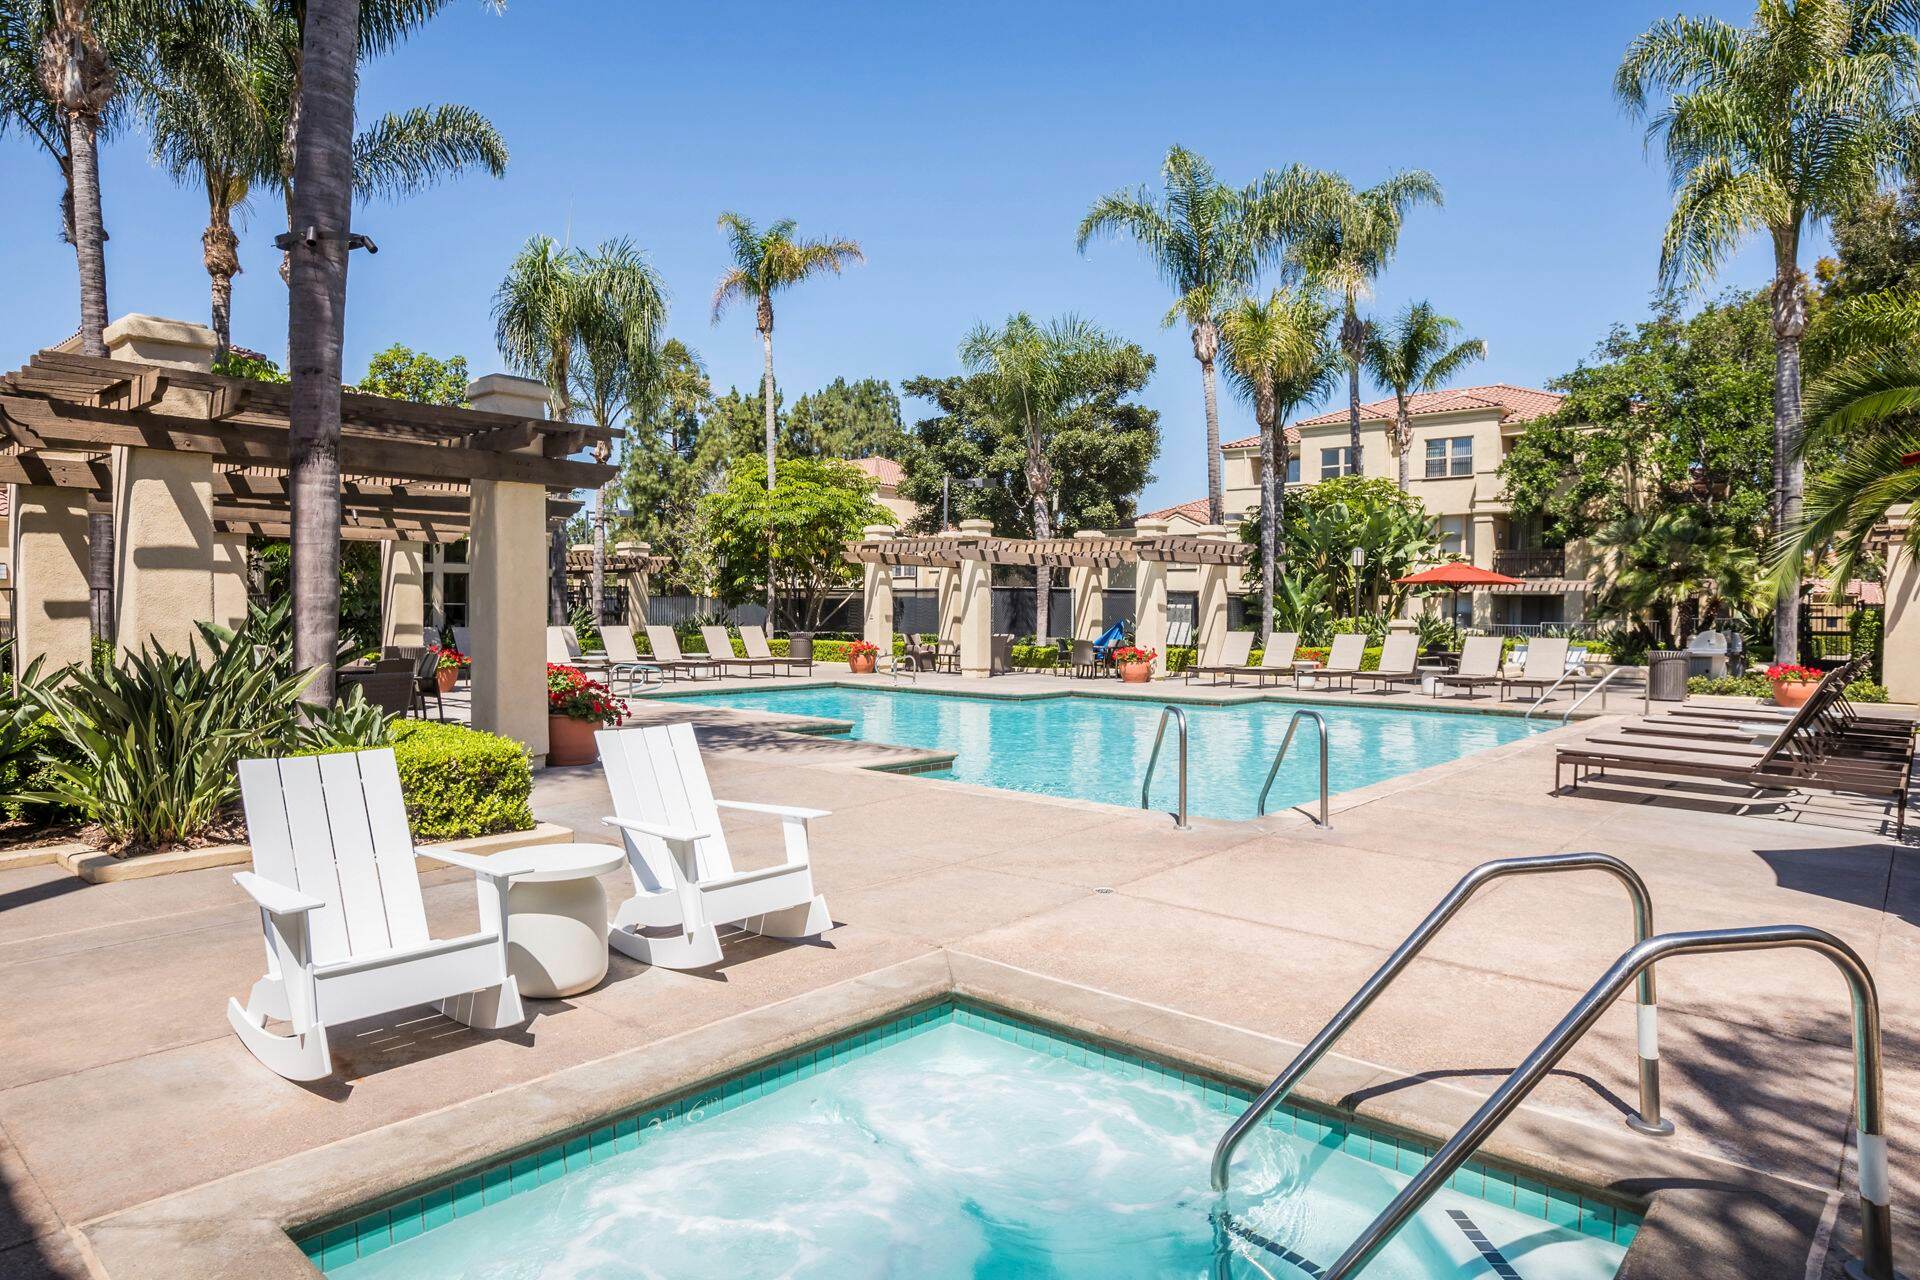 Pool and spa view at San Mateo Apartment Homes in Irvine, CA.